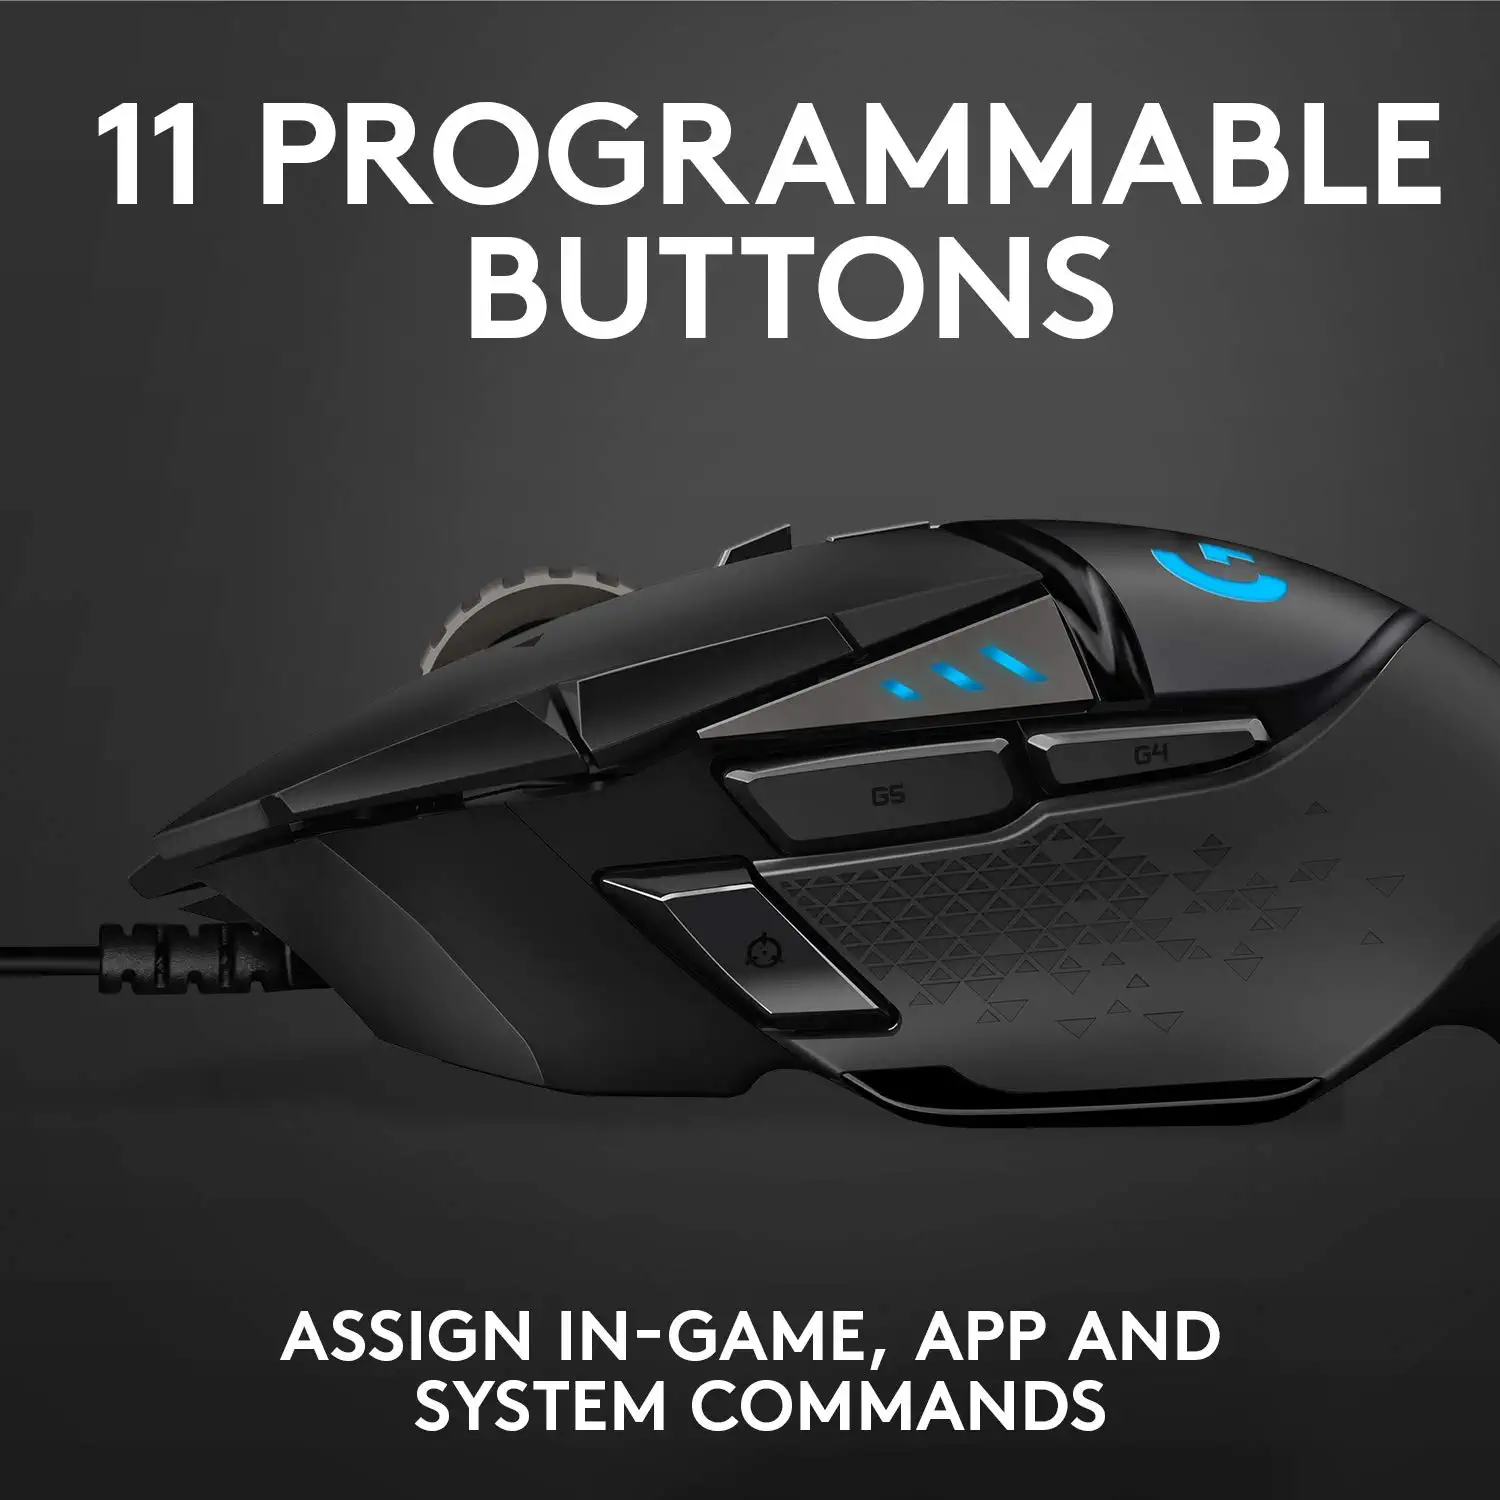 A gaming mouse normally has multiple programmable buttons that can be used for specific commands when playing certain games.